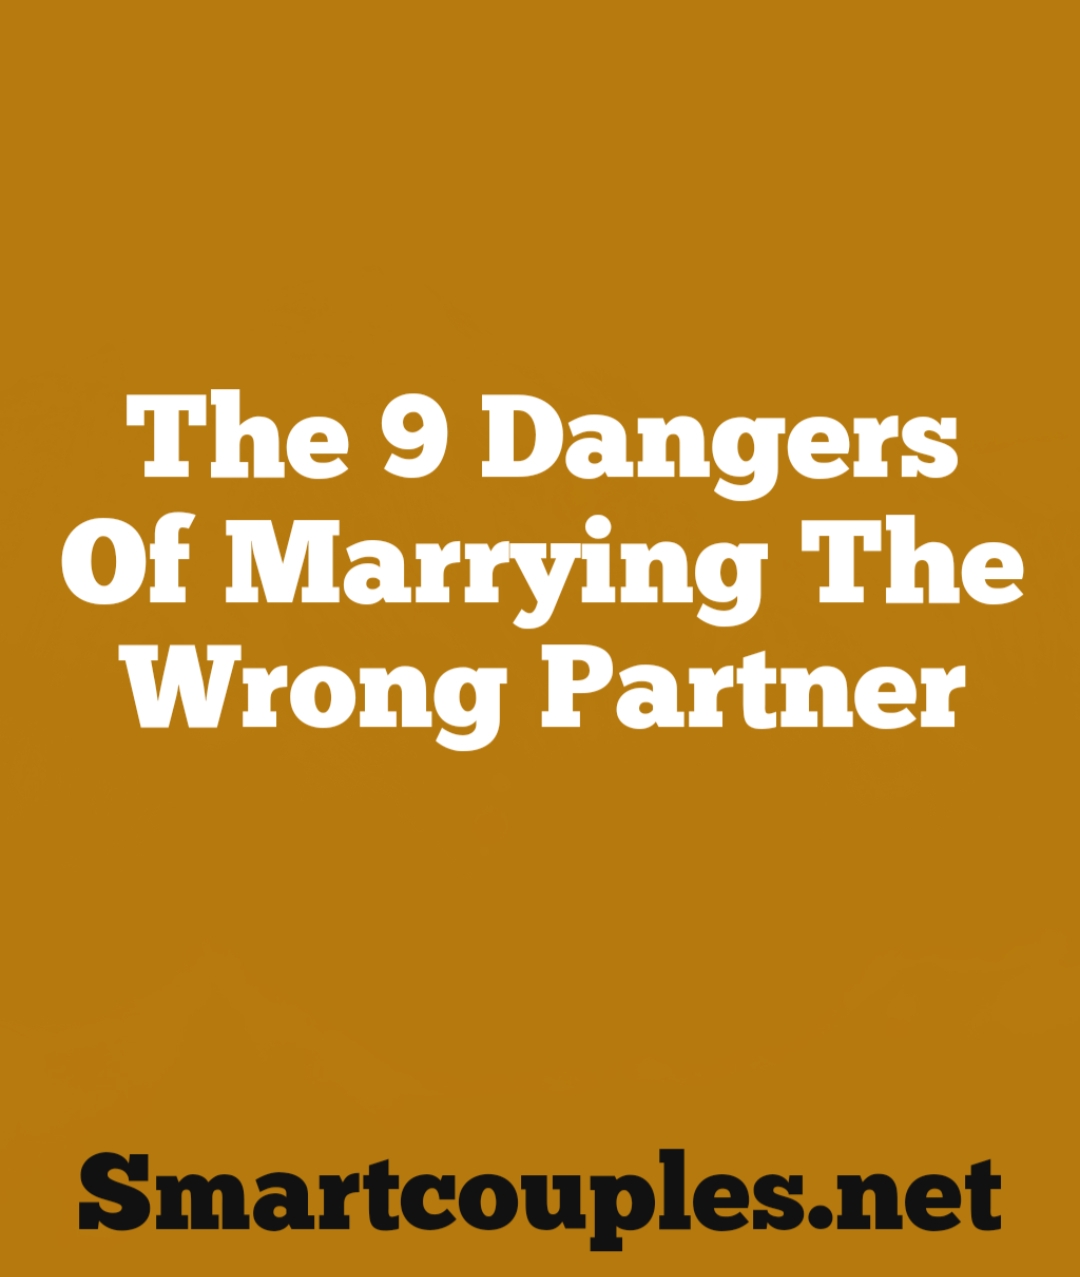 The 9 DANGERS OF MARRYING THE WRONG PARTNER